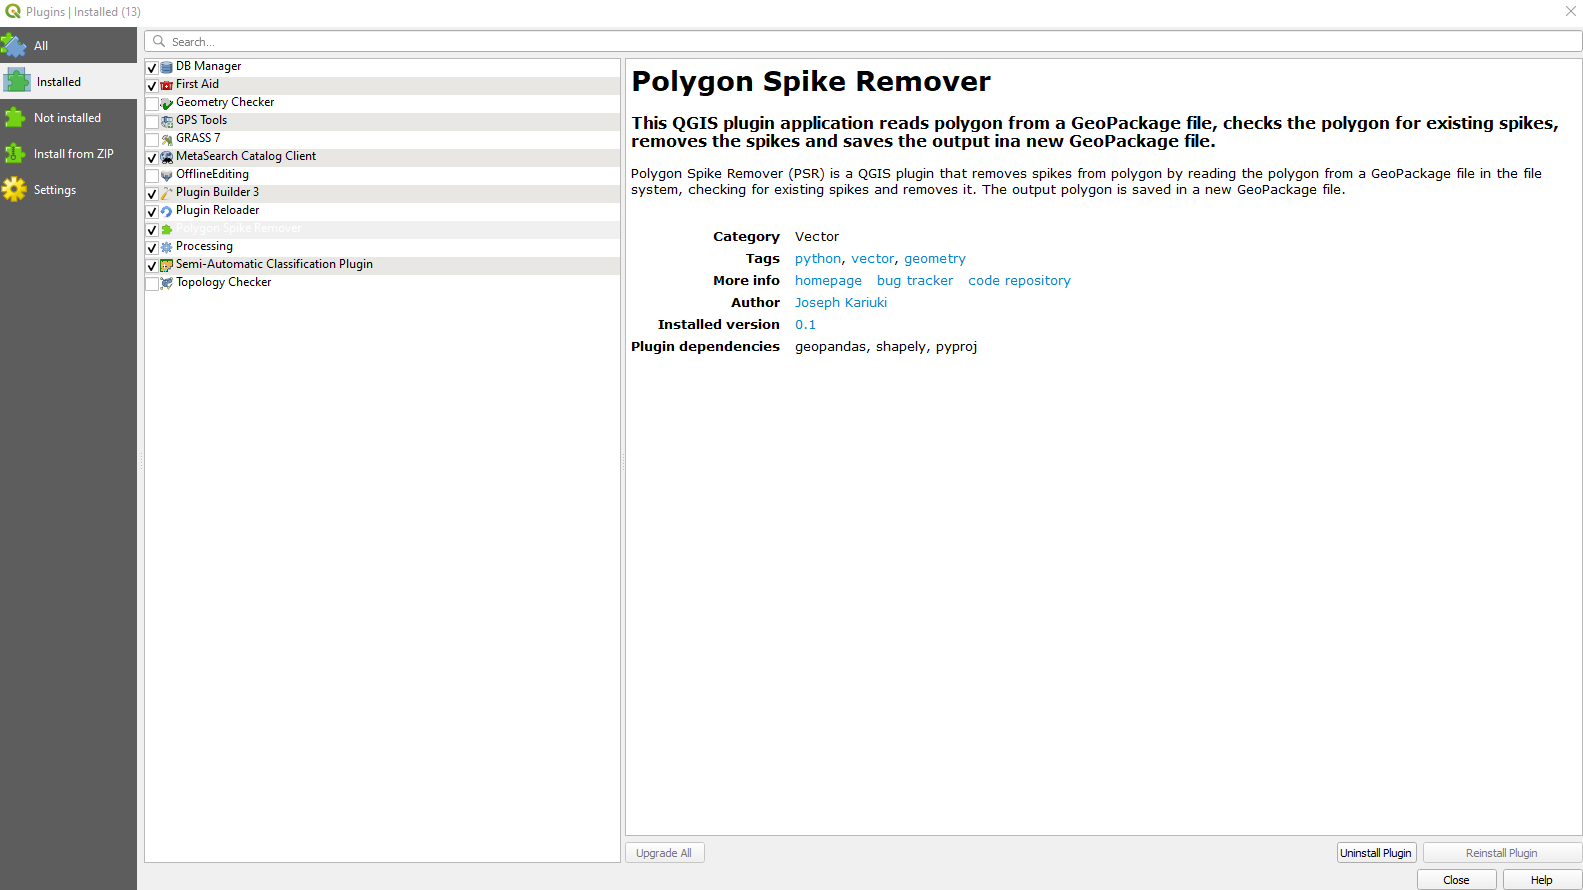 Polygon Spike Remover